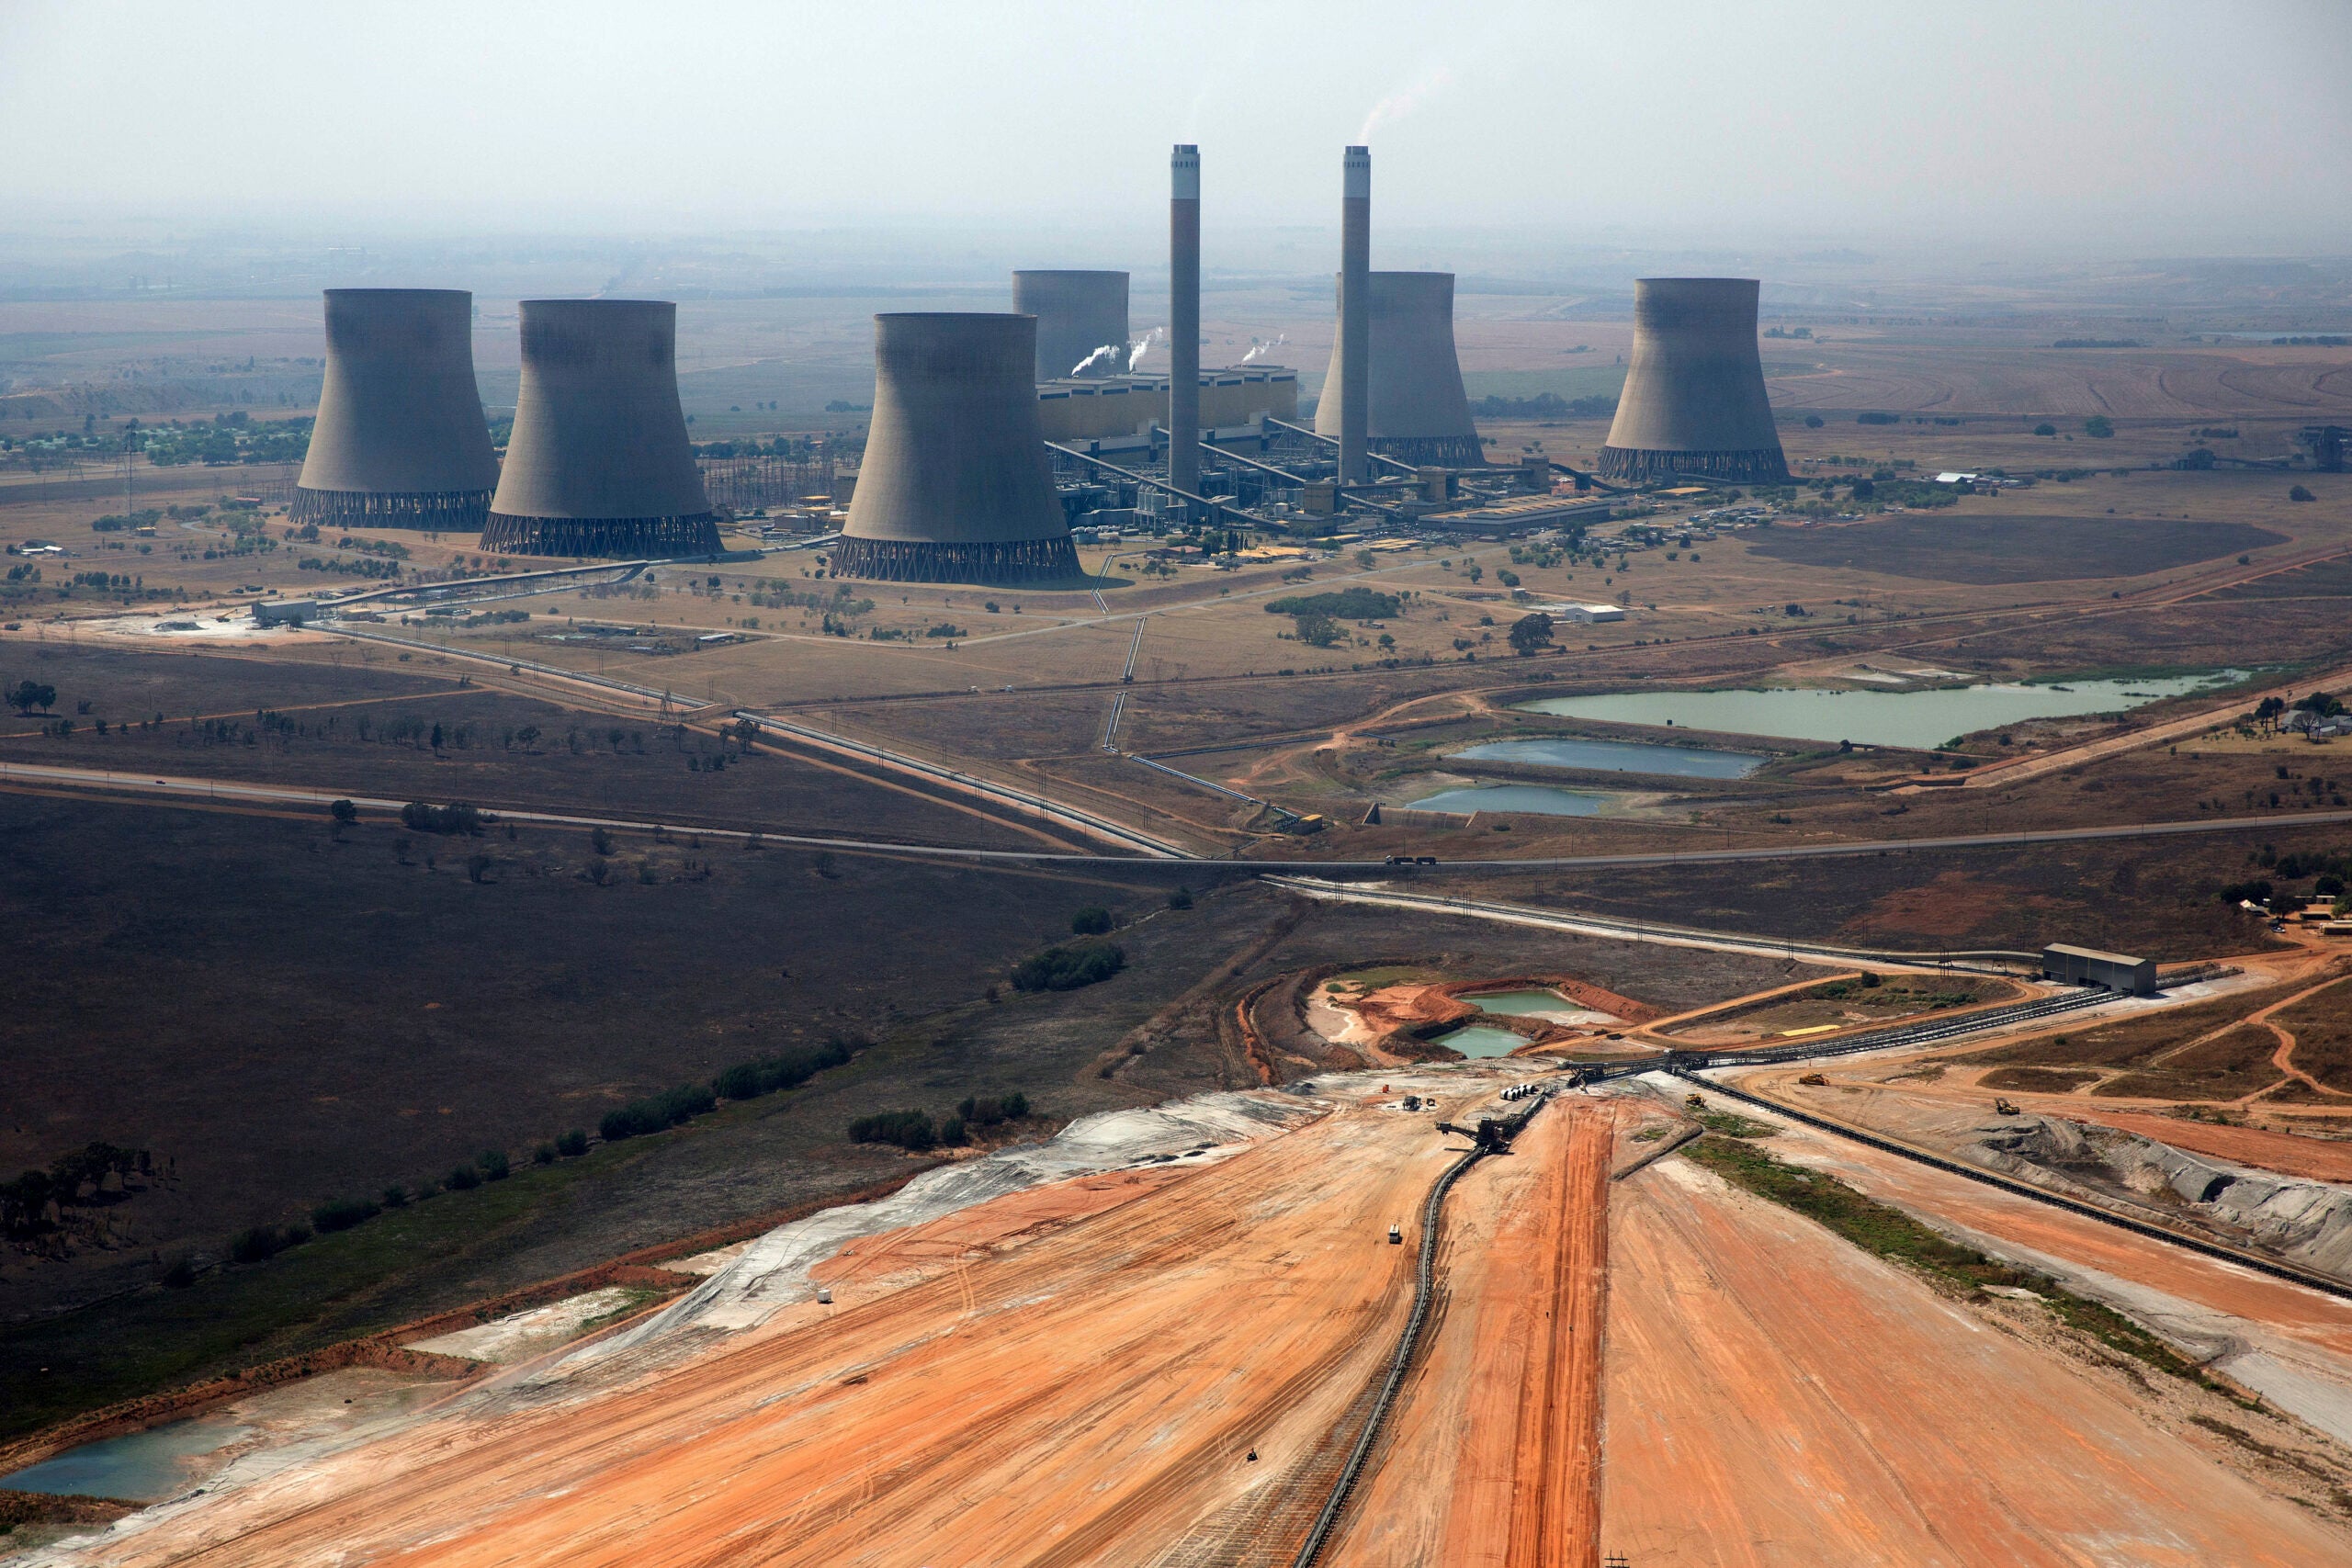 Kendal Power Station in South Africa's Mpumalanga Highveld, where the air is heavily polluted by coal-fired power plants.